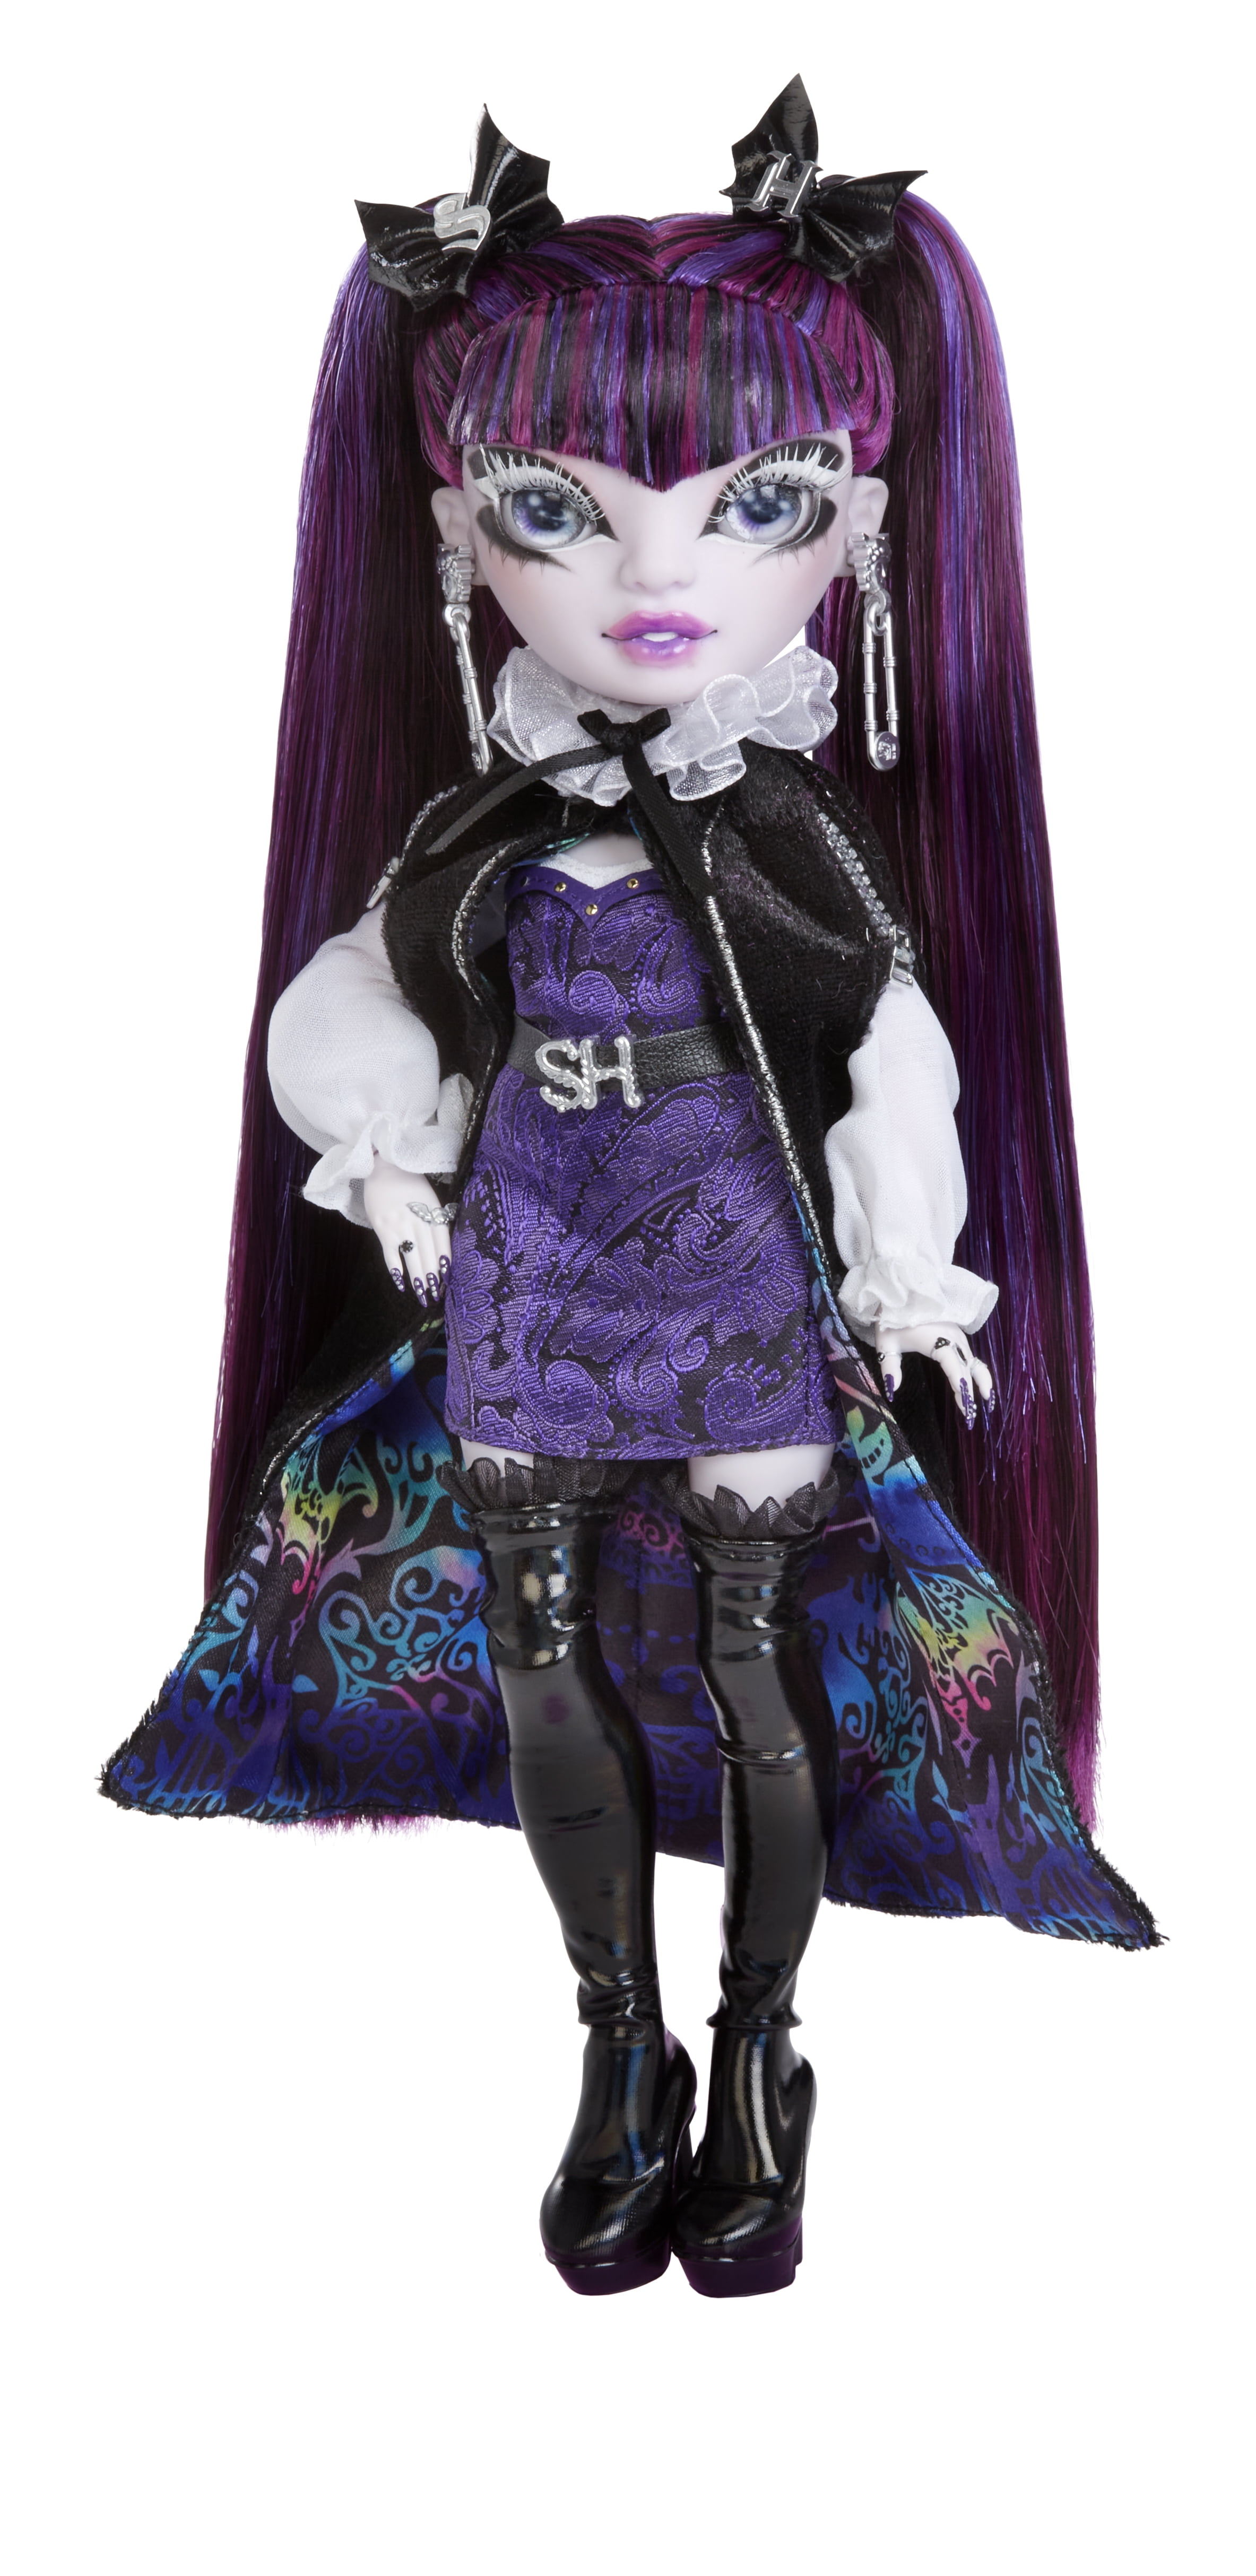 Rainbow Vision COSTUME BALL Shadow High ? Demi Batista (Purple) Fashion Doll. 11 inch Bat themed Costume and Accessories. Toys for Kids, Great Gift for Kids 6-12 Years Old & Collectors - Walmart.com